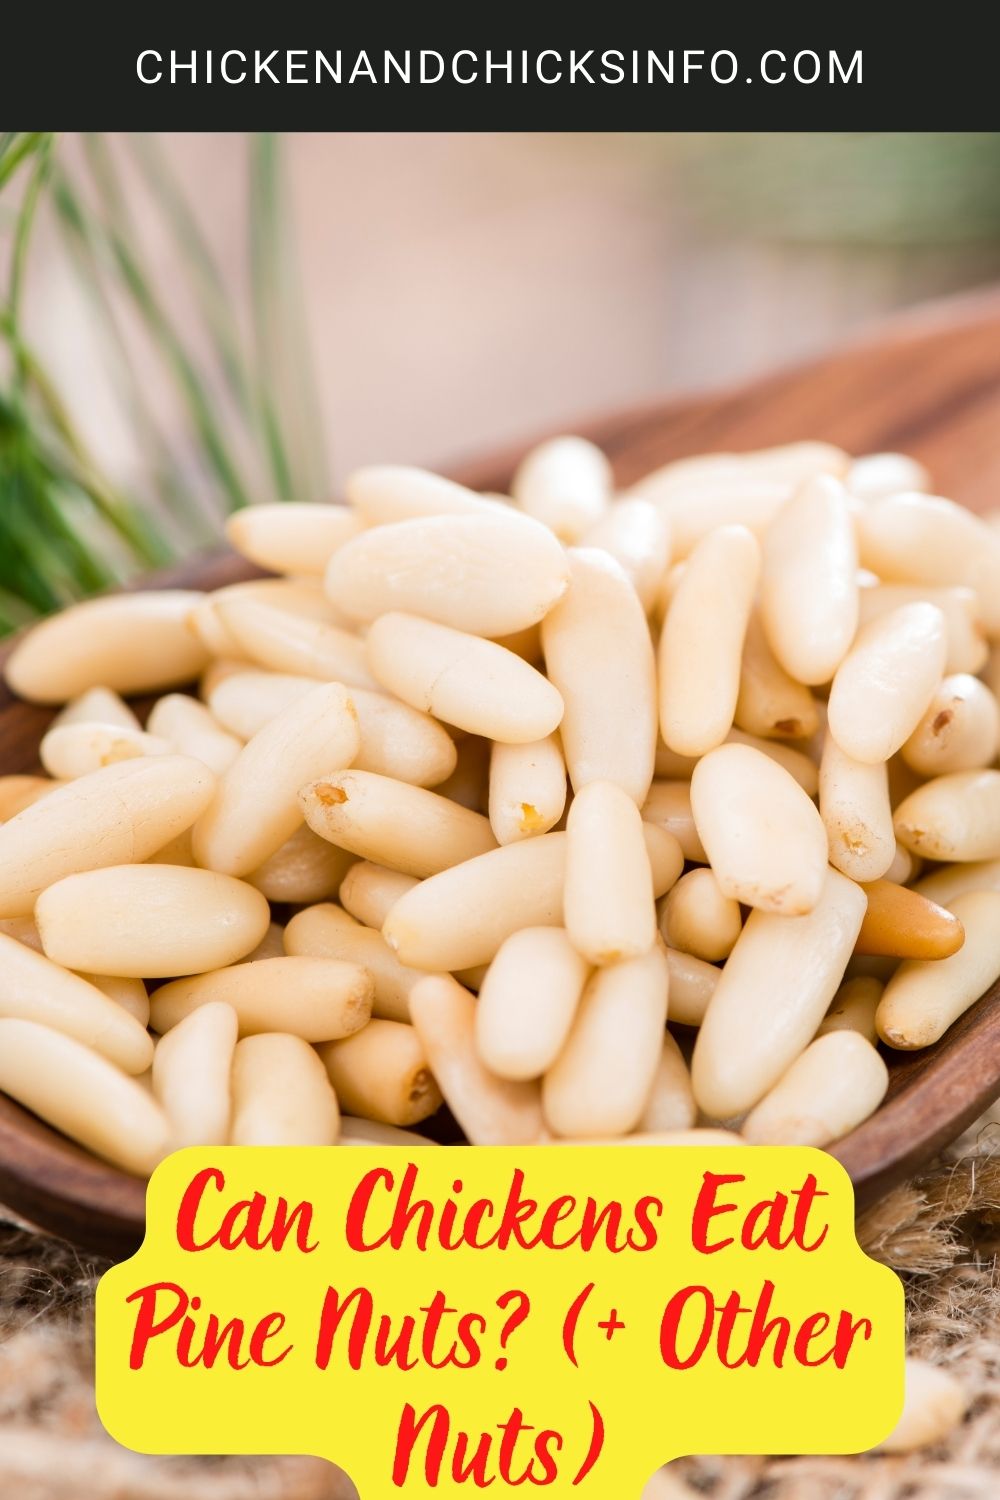 Can Chickens Eat Pine Nuts? (+ Other Nuts) poster.
